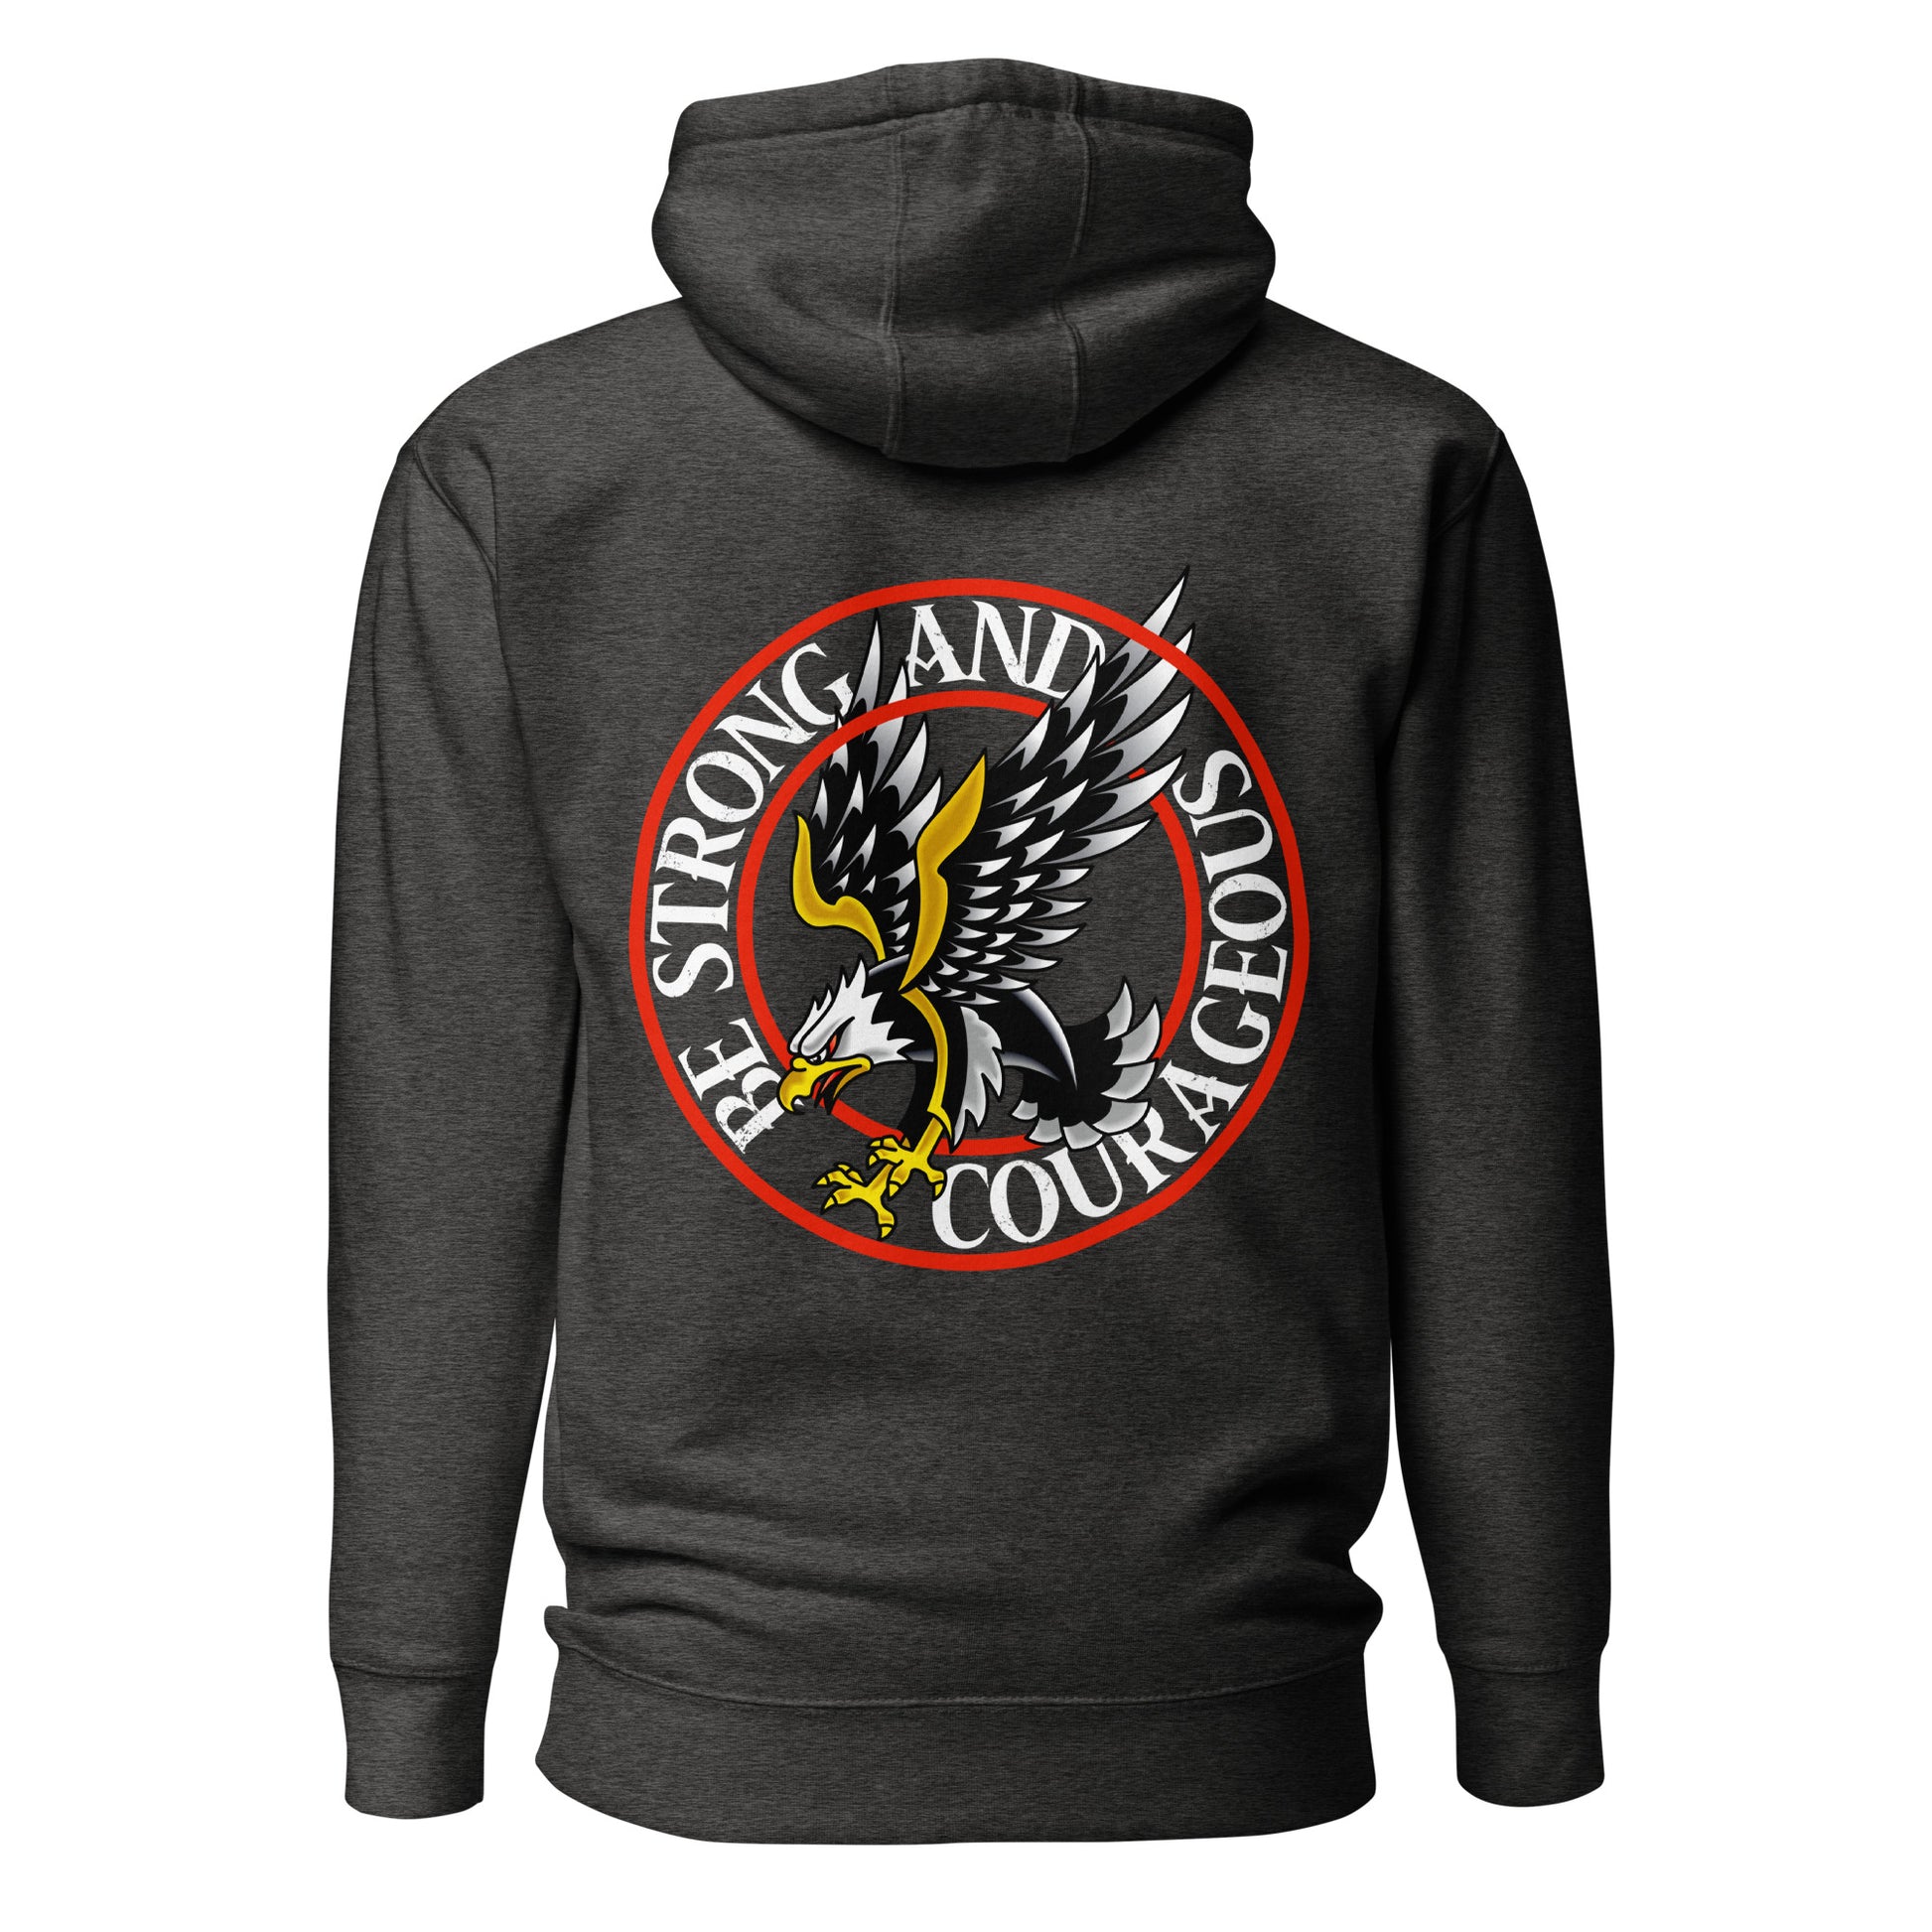 Be Strong & Courageous Hoodie - For Your Courage